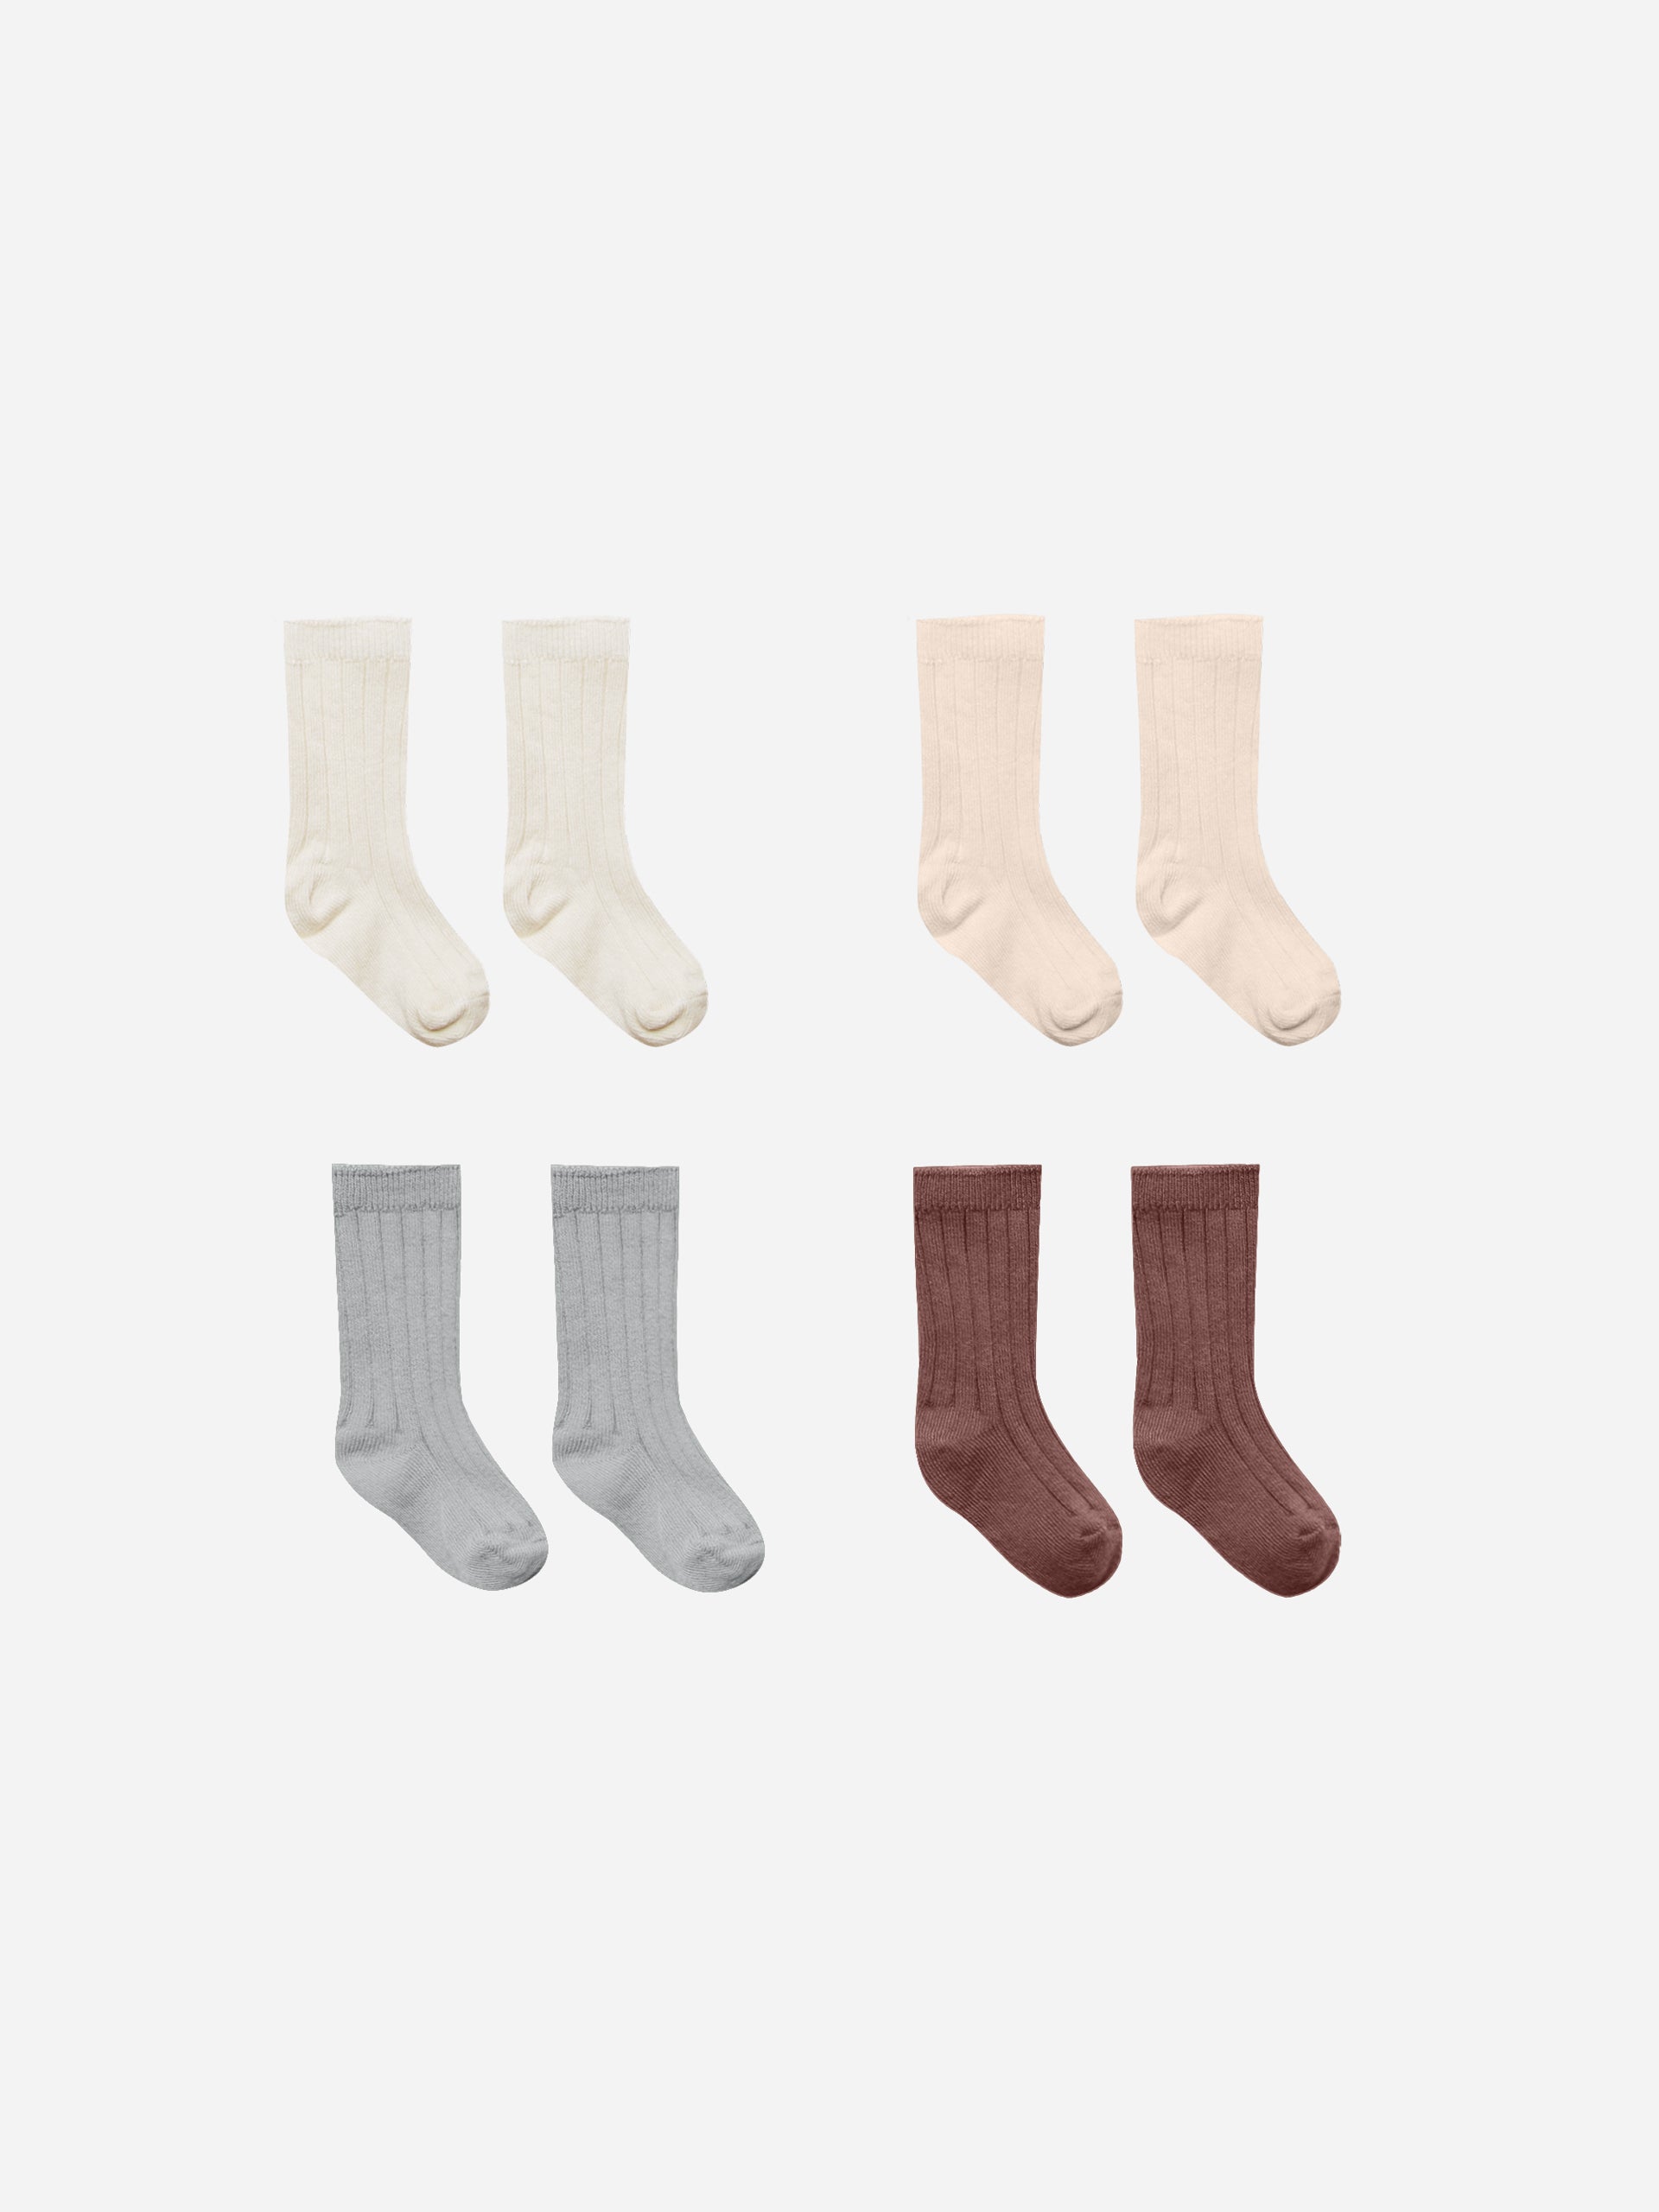 Socks, Set Of 4 || Ivory, Shell, Dusty Blue, Plum - Rylee + Cru | Kids Clothes | Trendy Baby Clothes | Modern Infant Outfits |